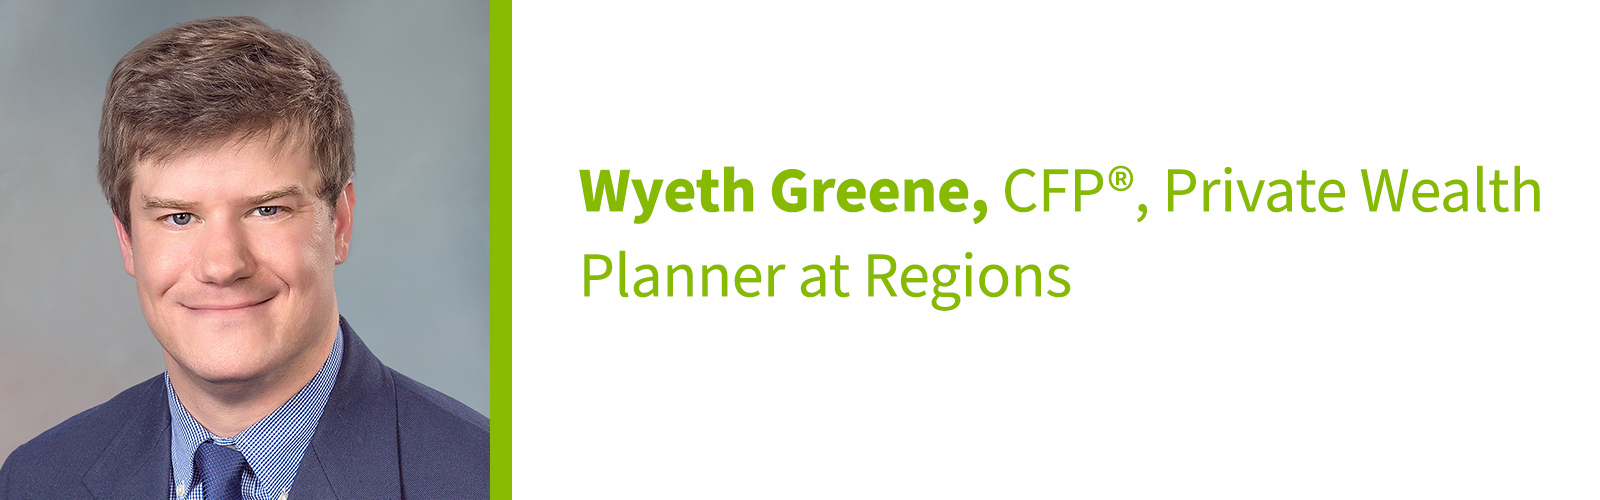 Wyeth Greene, CFP®, Private Wealth Planner at Regions